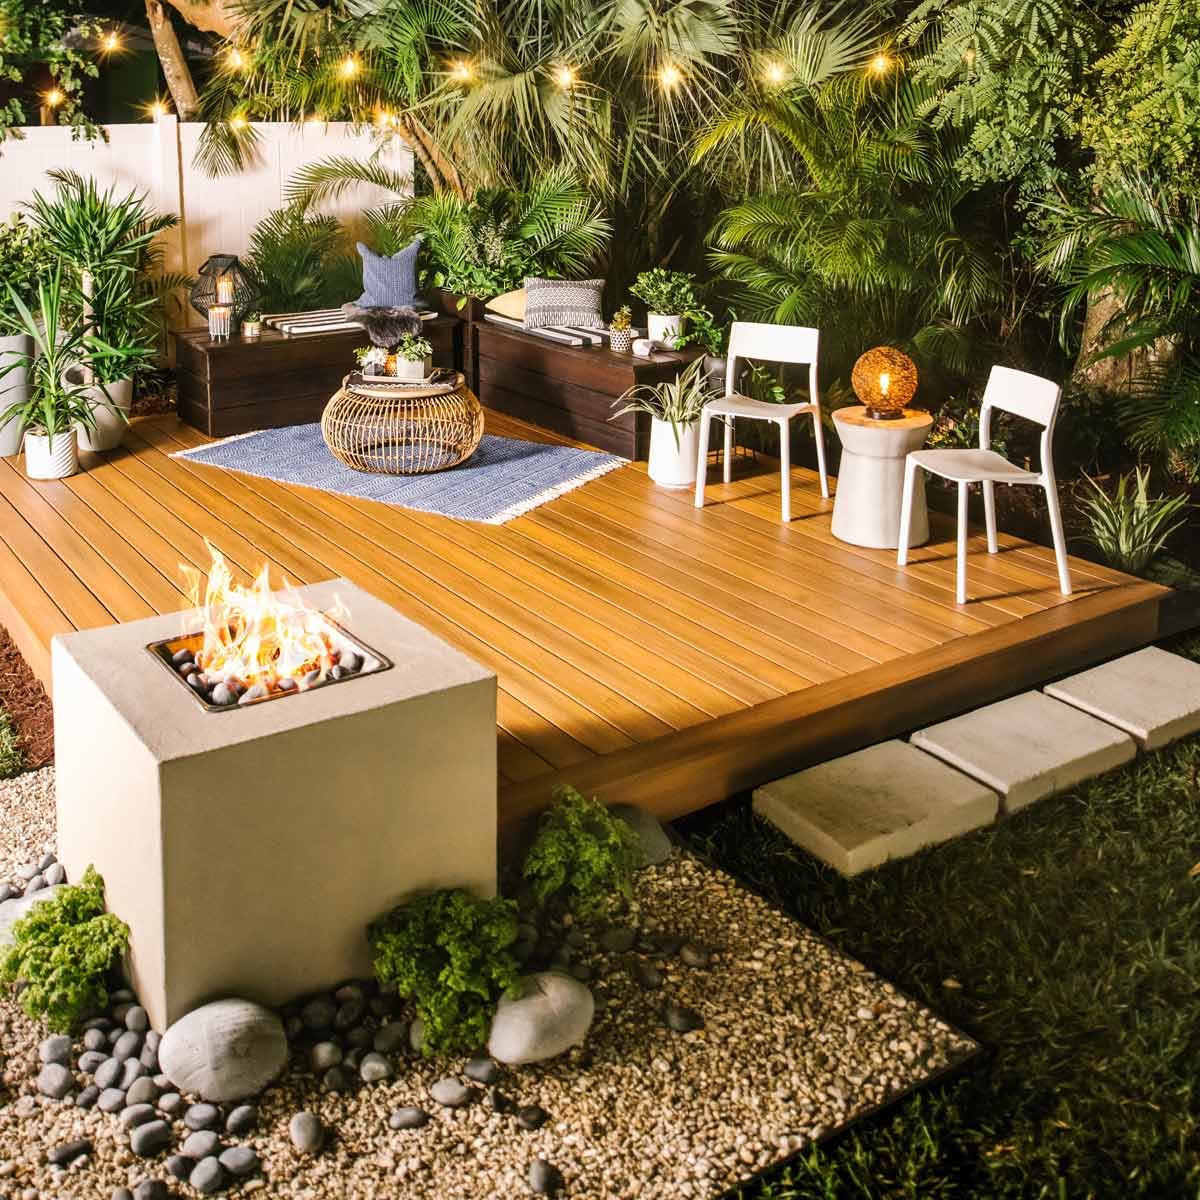 50 Brilliant Ways to Spruce Up Your Backyard This Summer